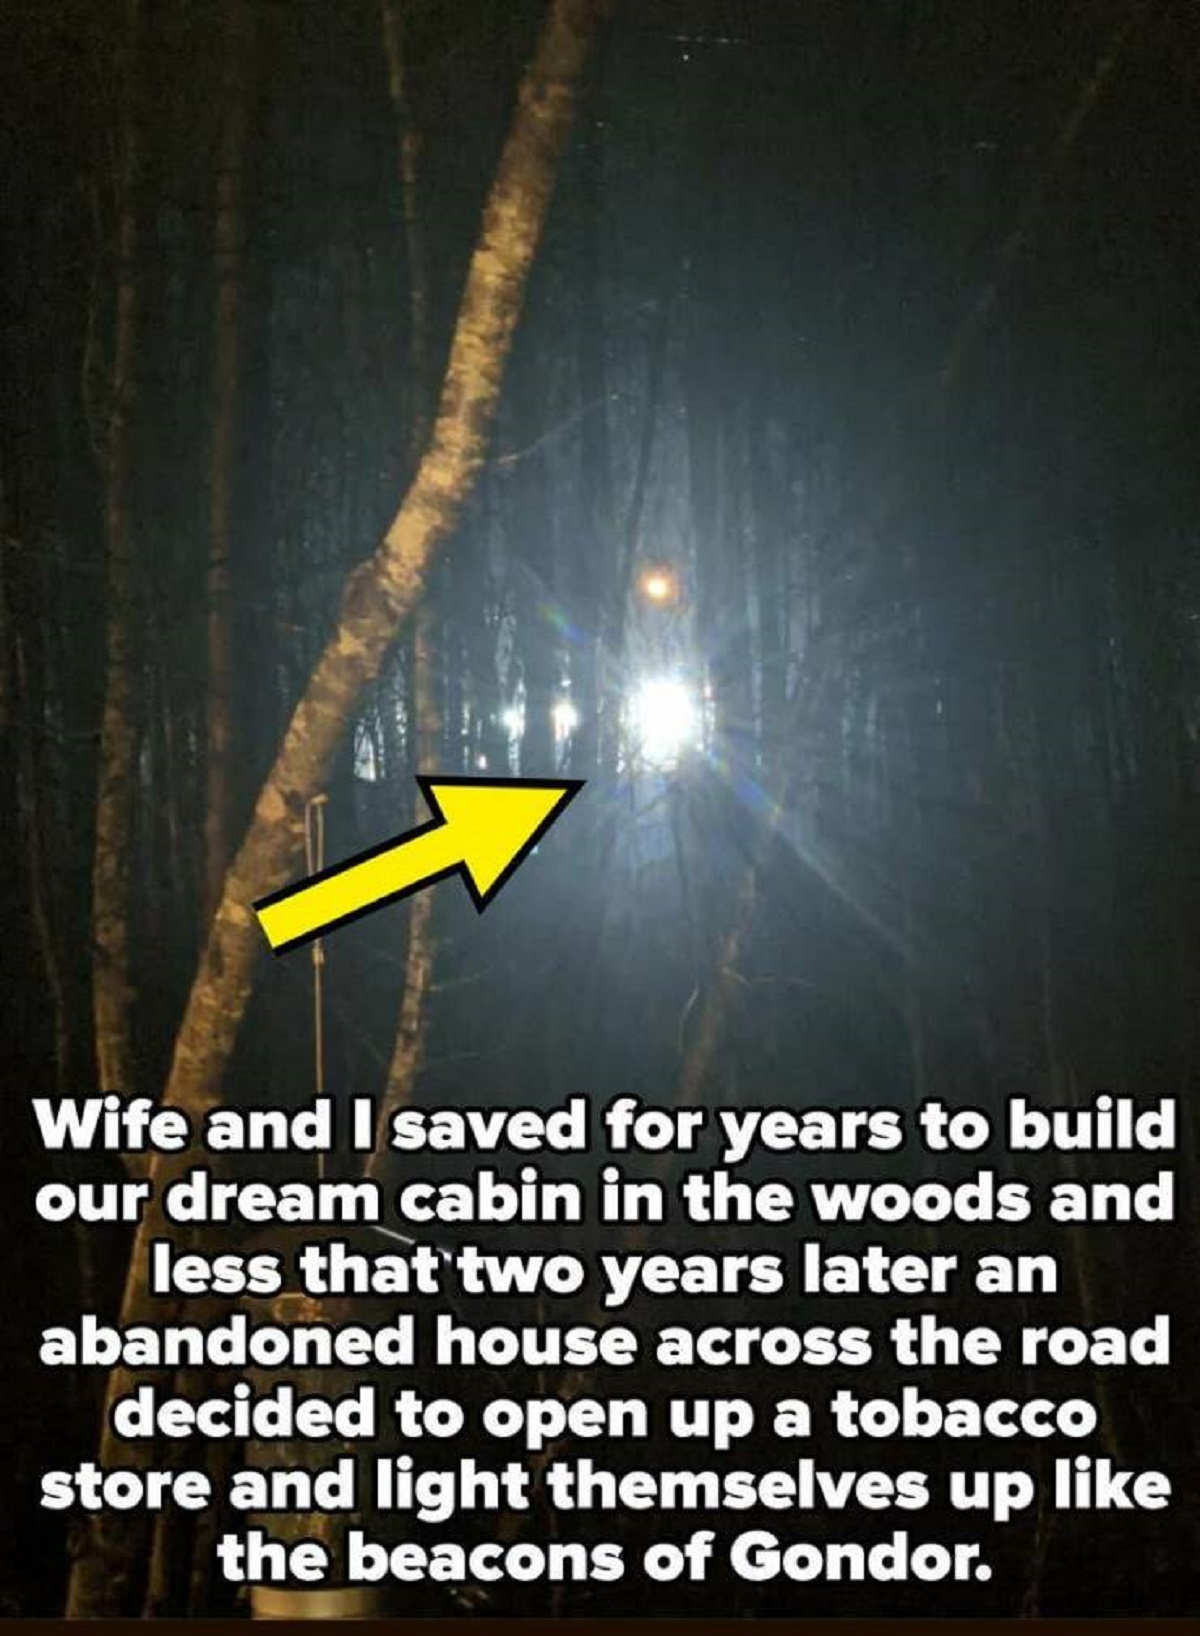 tree - Wife and I saved for years to build our dream cabin in the woods and less that two years later an abandoned house across the road decided to open up a tobacco store and light themselves up the beacons of Gondor.